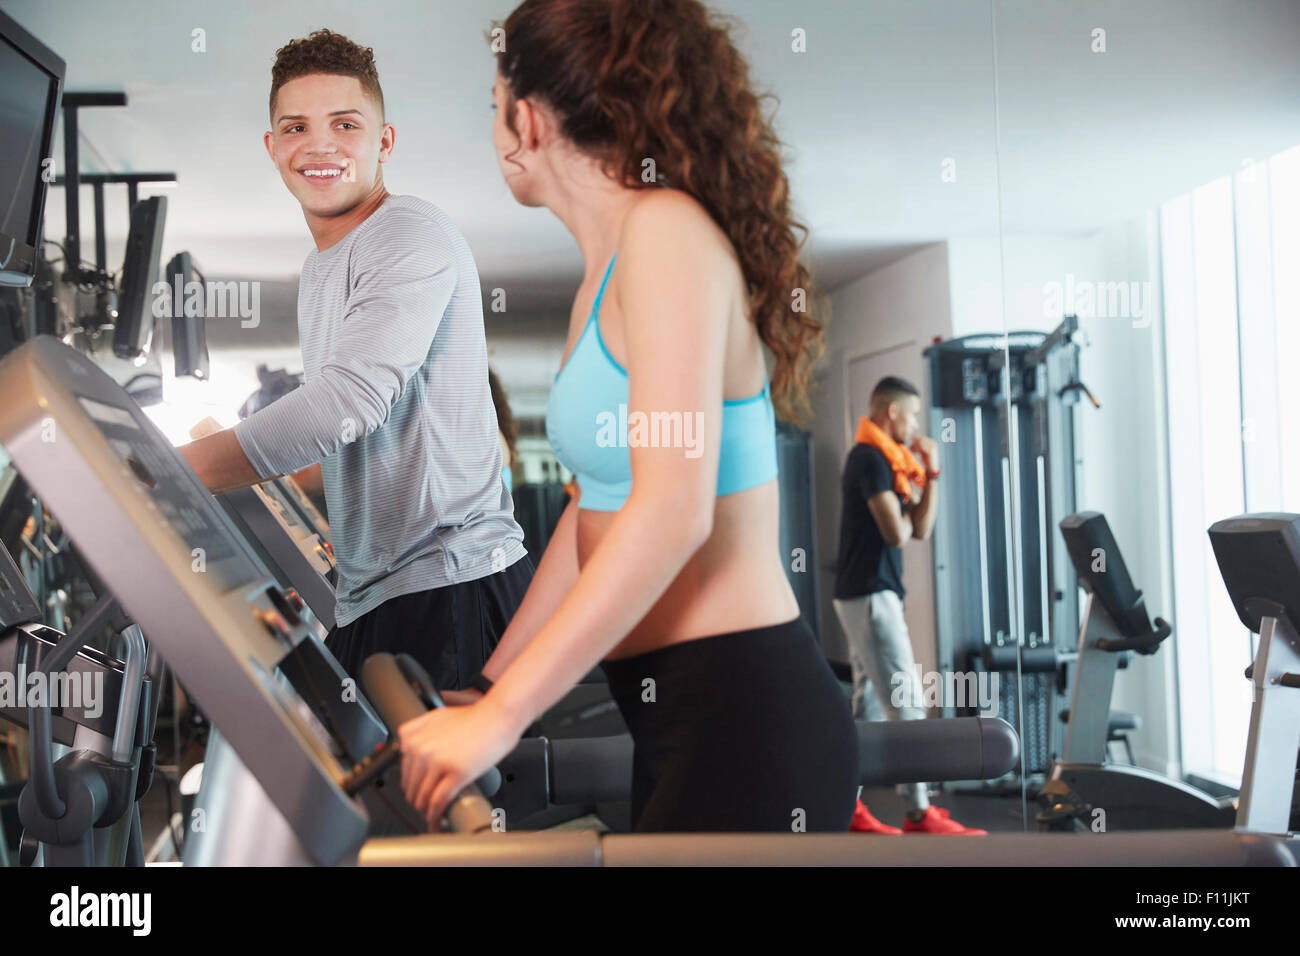 Couple using exercise machines in gym Stock Photo